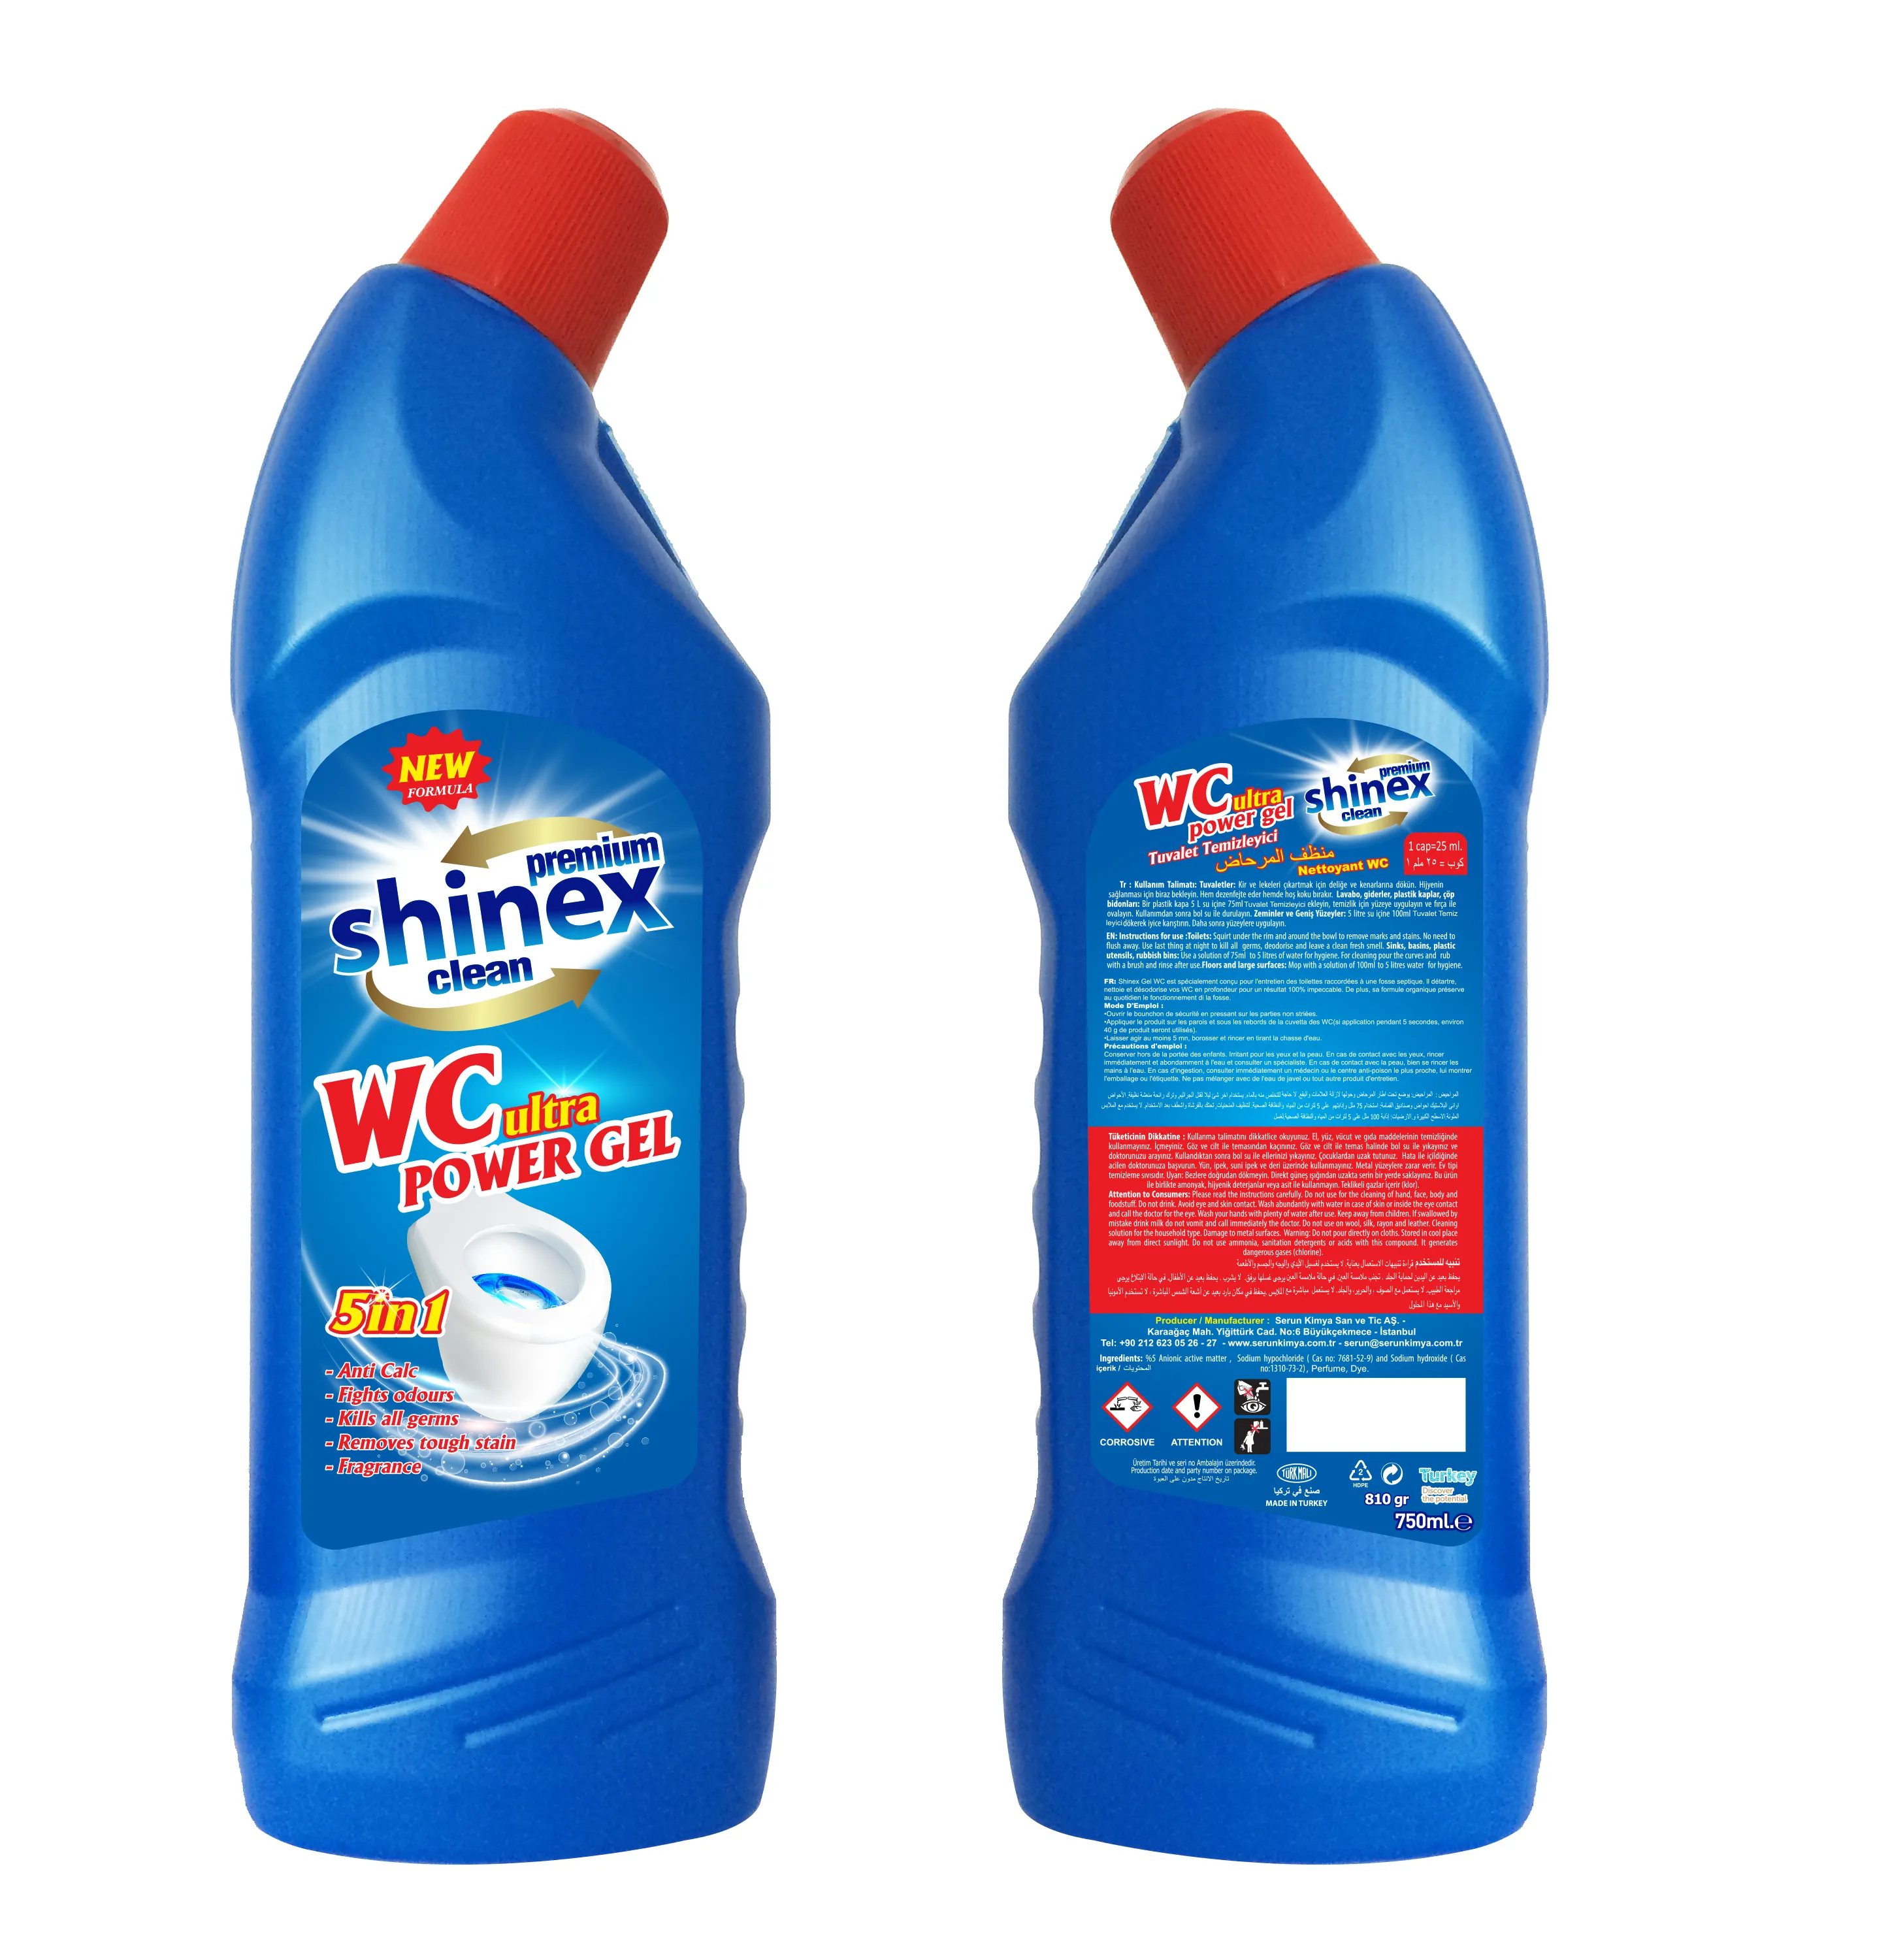 SHINEX WC Ultra Power Gel 750ml Cleaning for Toilet and Bathroom Cleaner bowl liquid cleaning detergents New Formula OEM PL